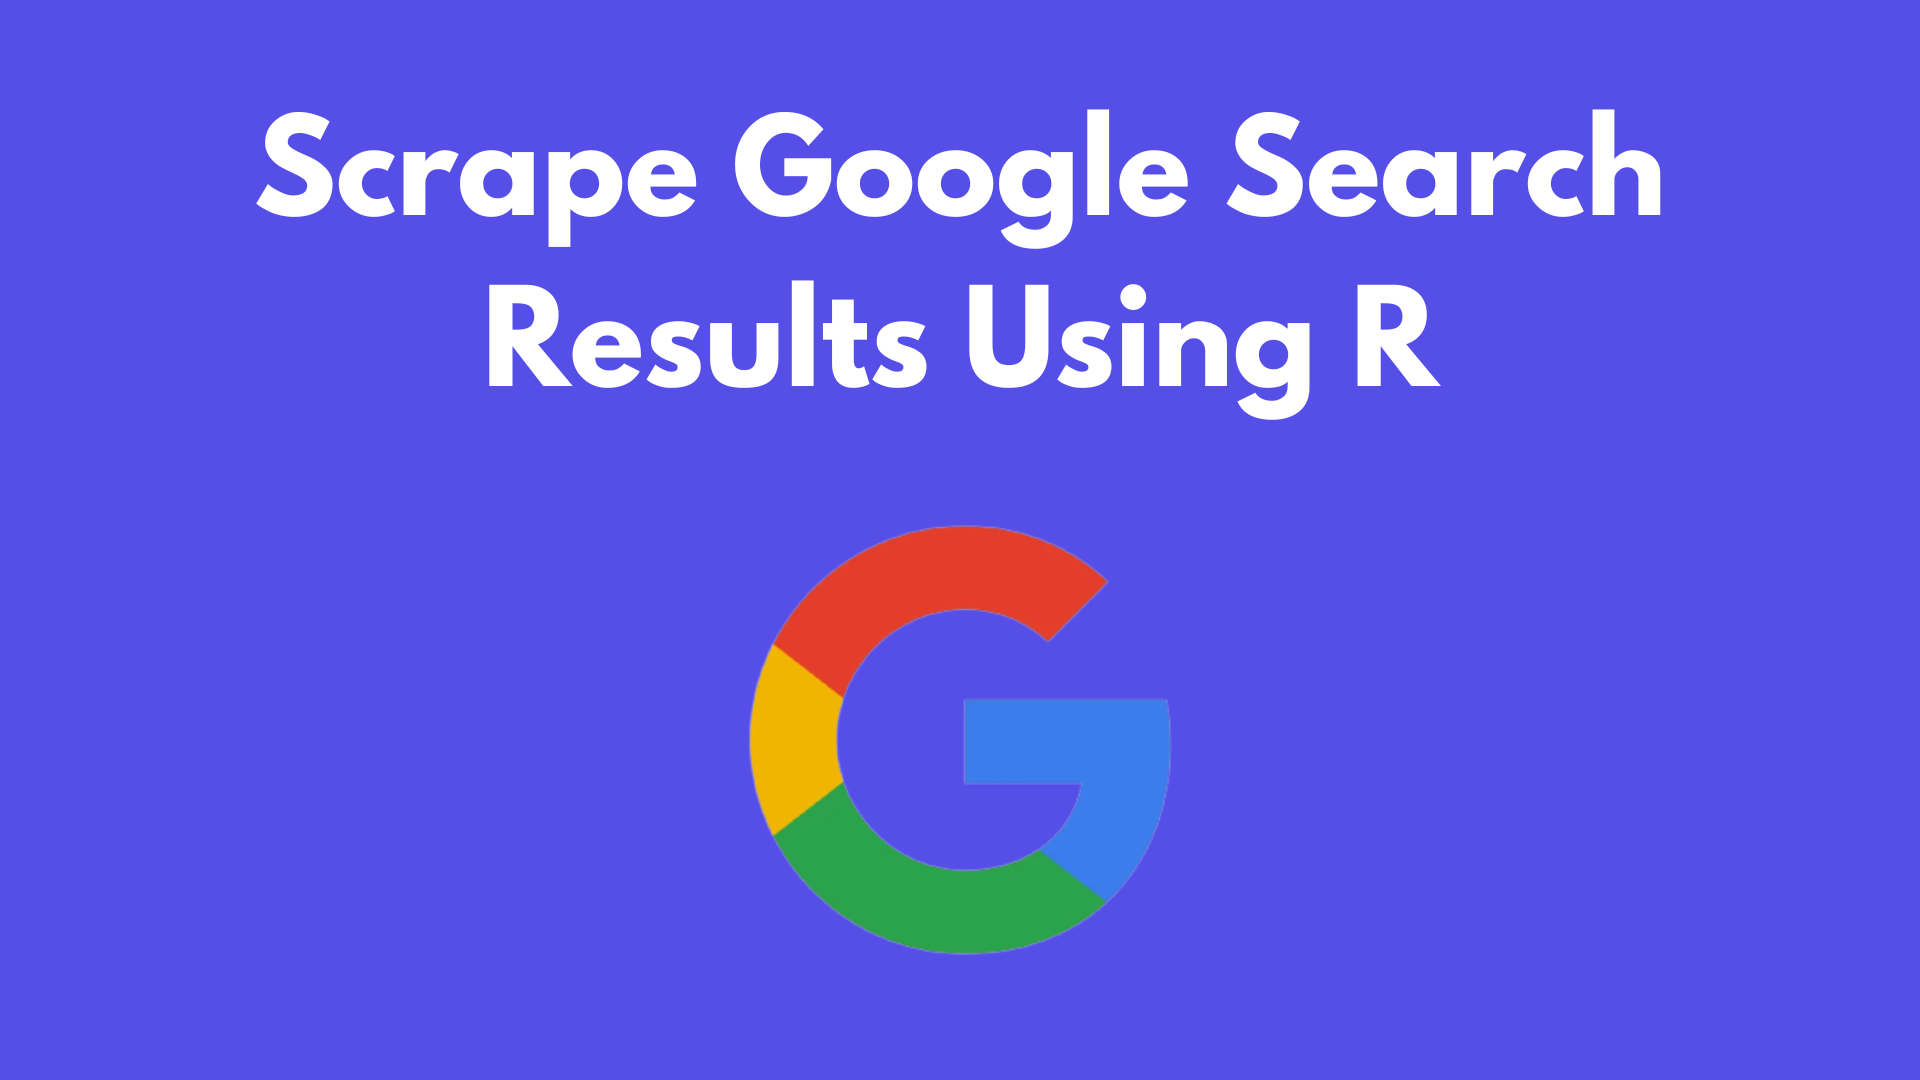 Scraping Google Search Results Using R